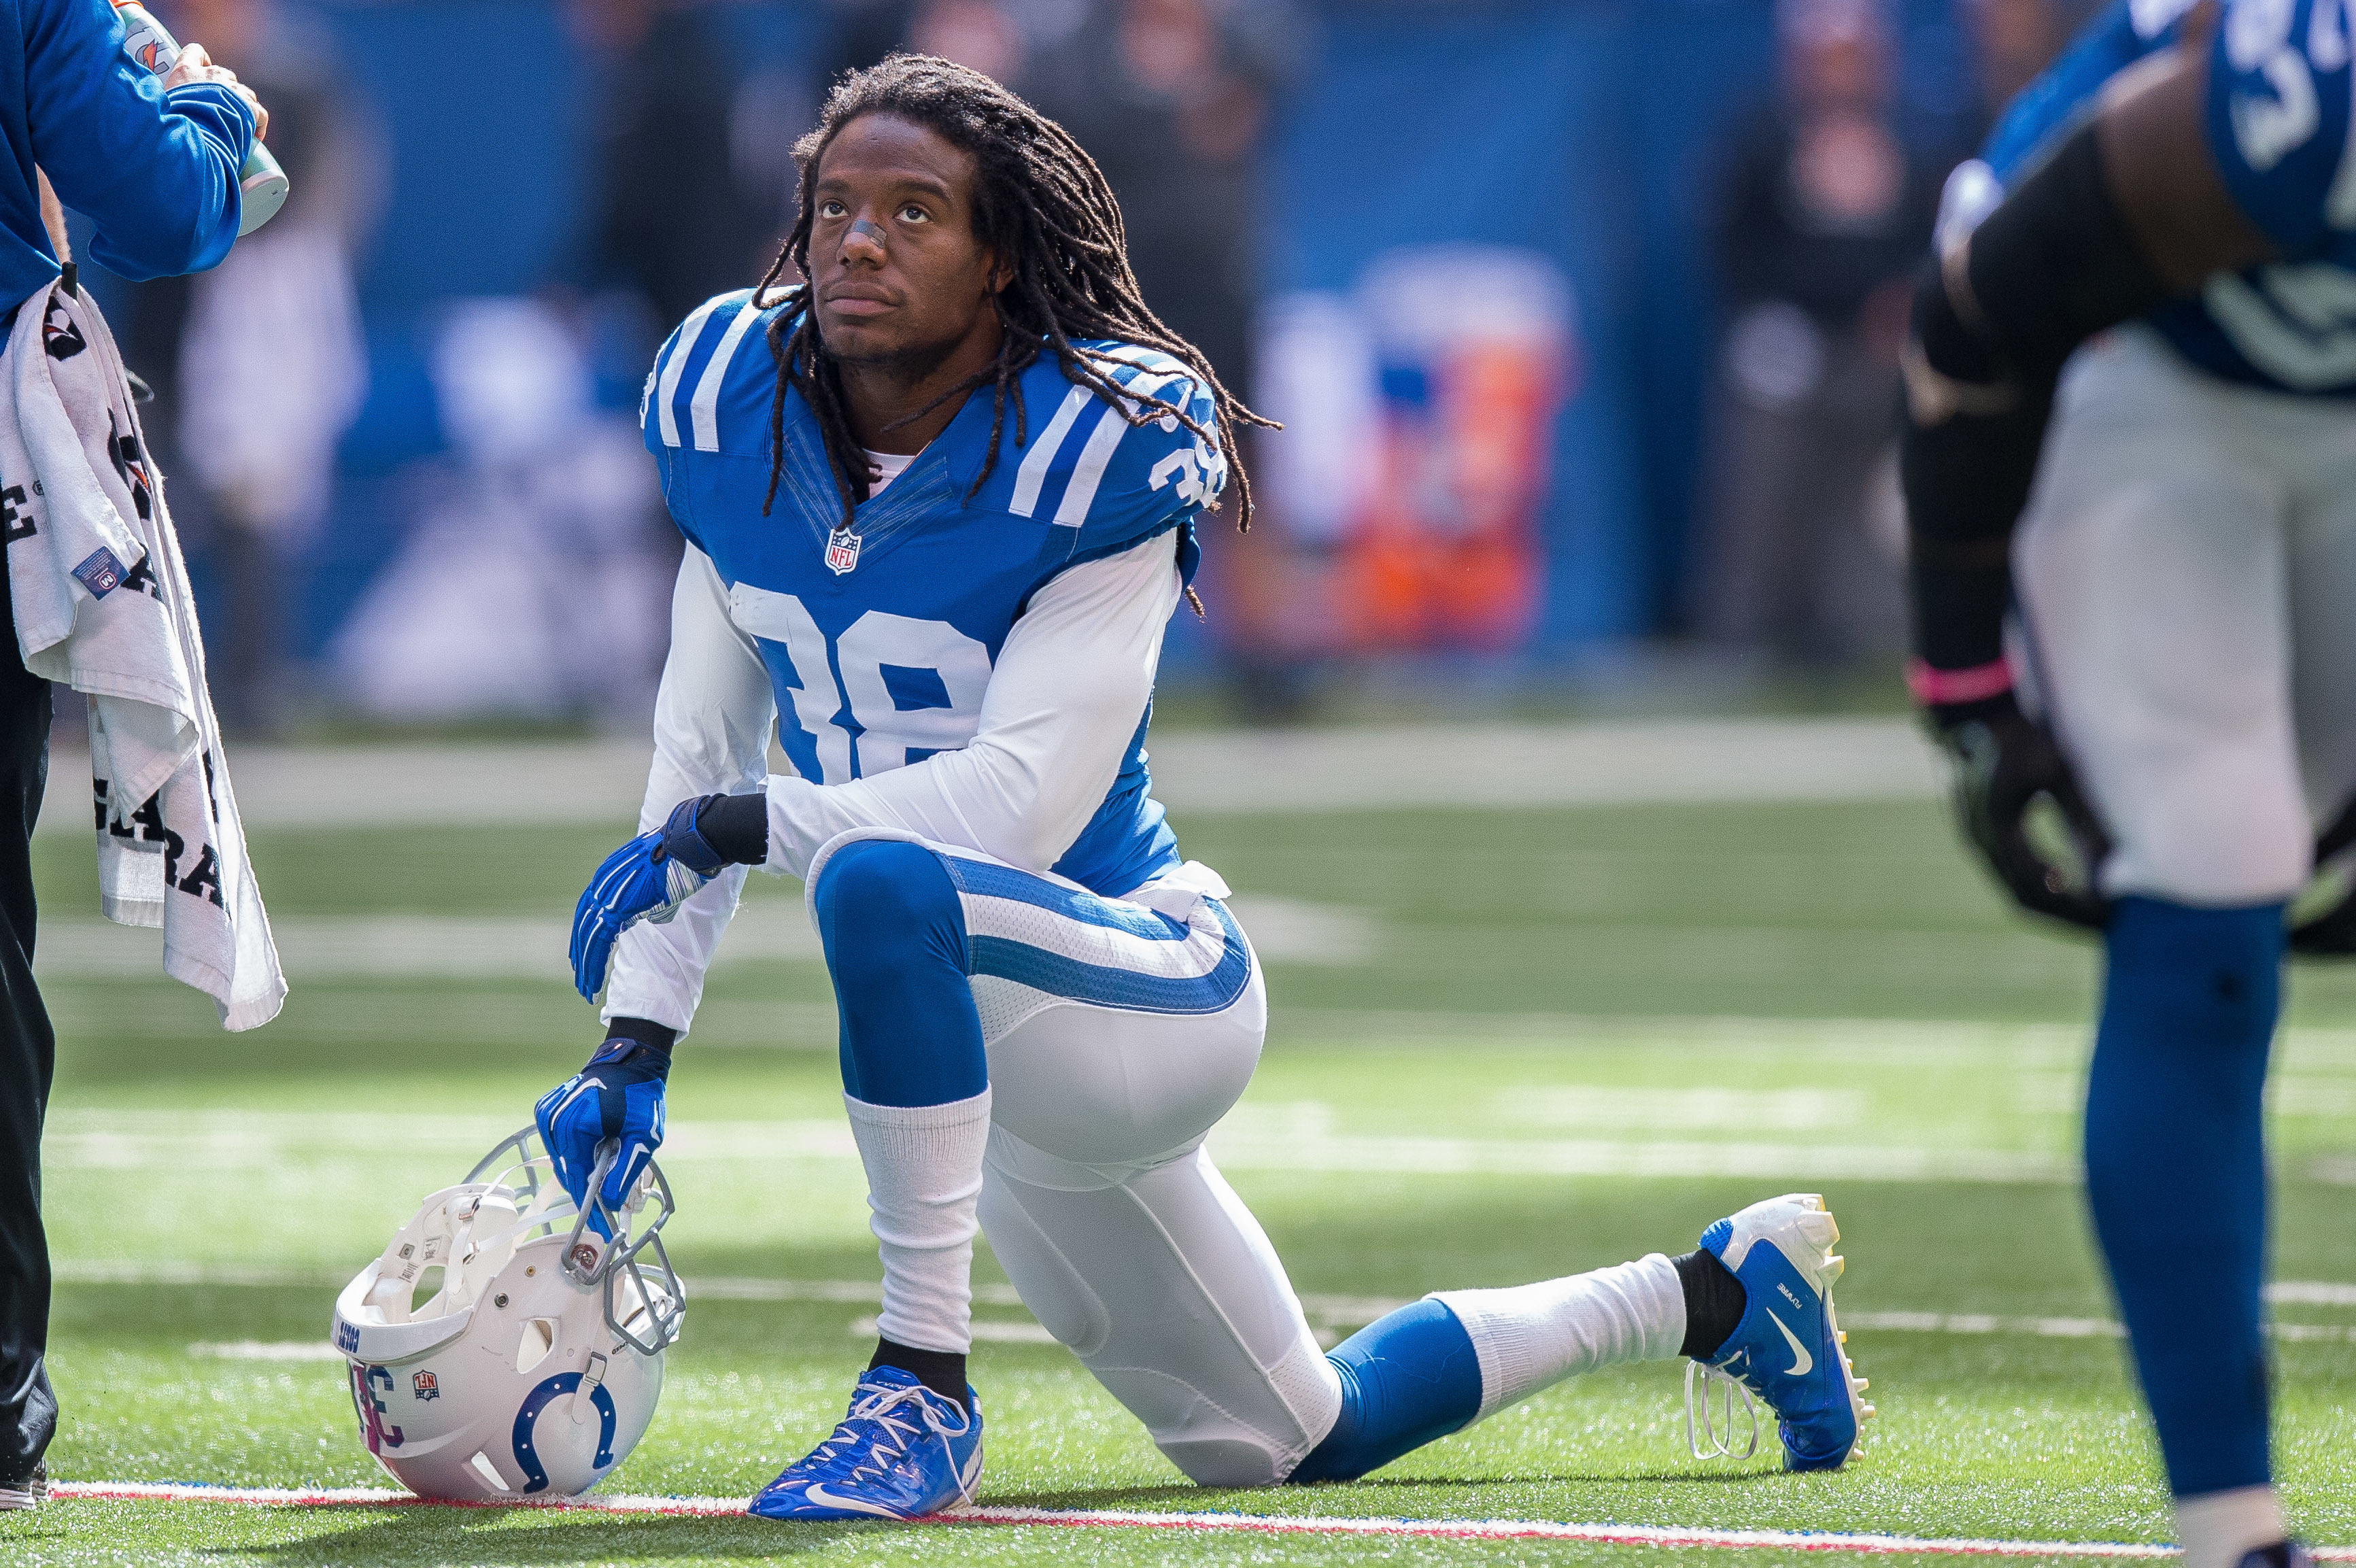 Sergio Brown of the Indianapolis Colts during a timeout during a football game at Lucas Oil Stadium in Indianapolis, Indiana, on October 19, 2014 | Source: Getty Images